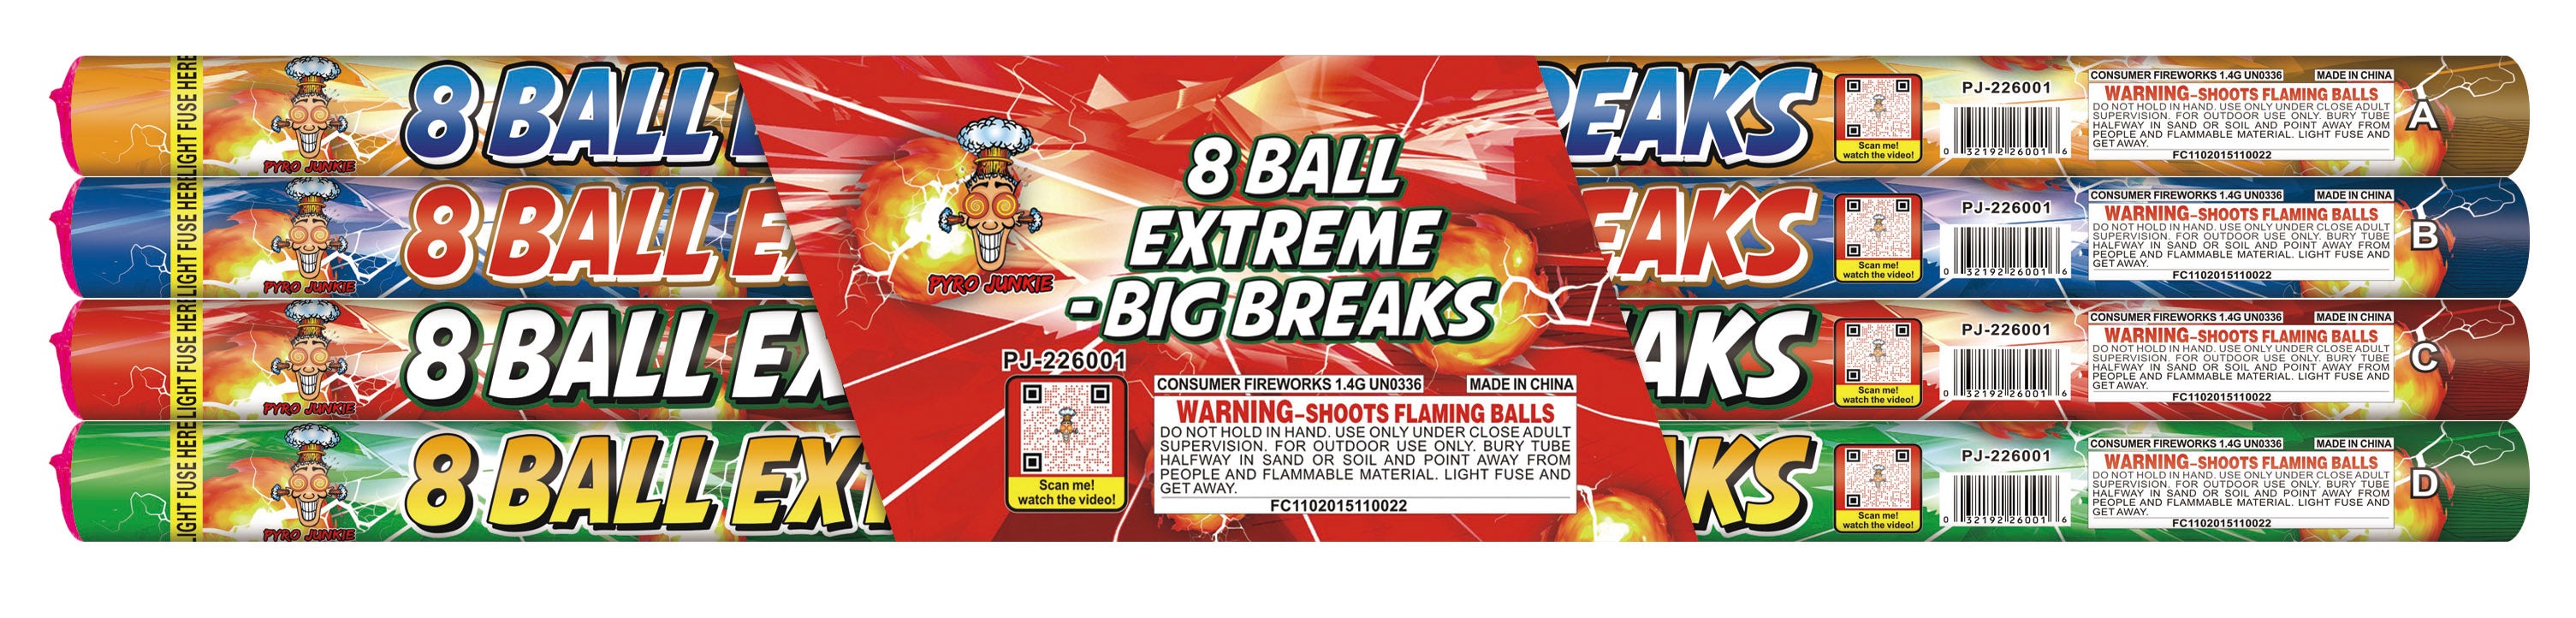 8 BALL EXTREME BY PJ(24/4)